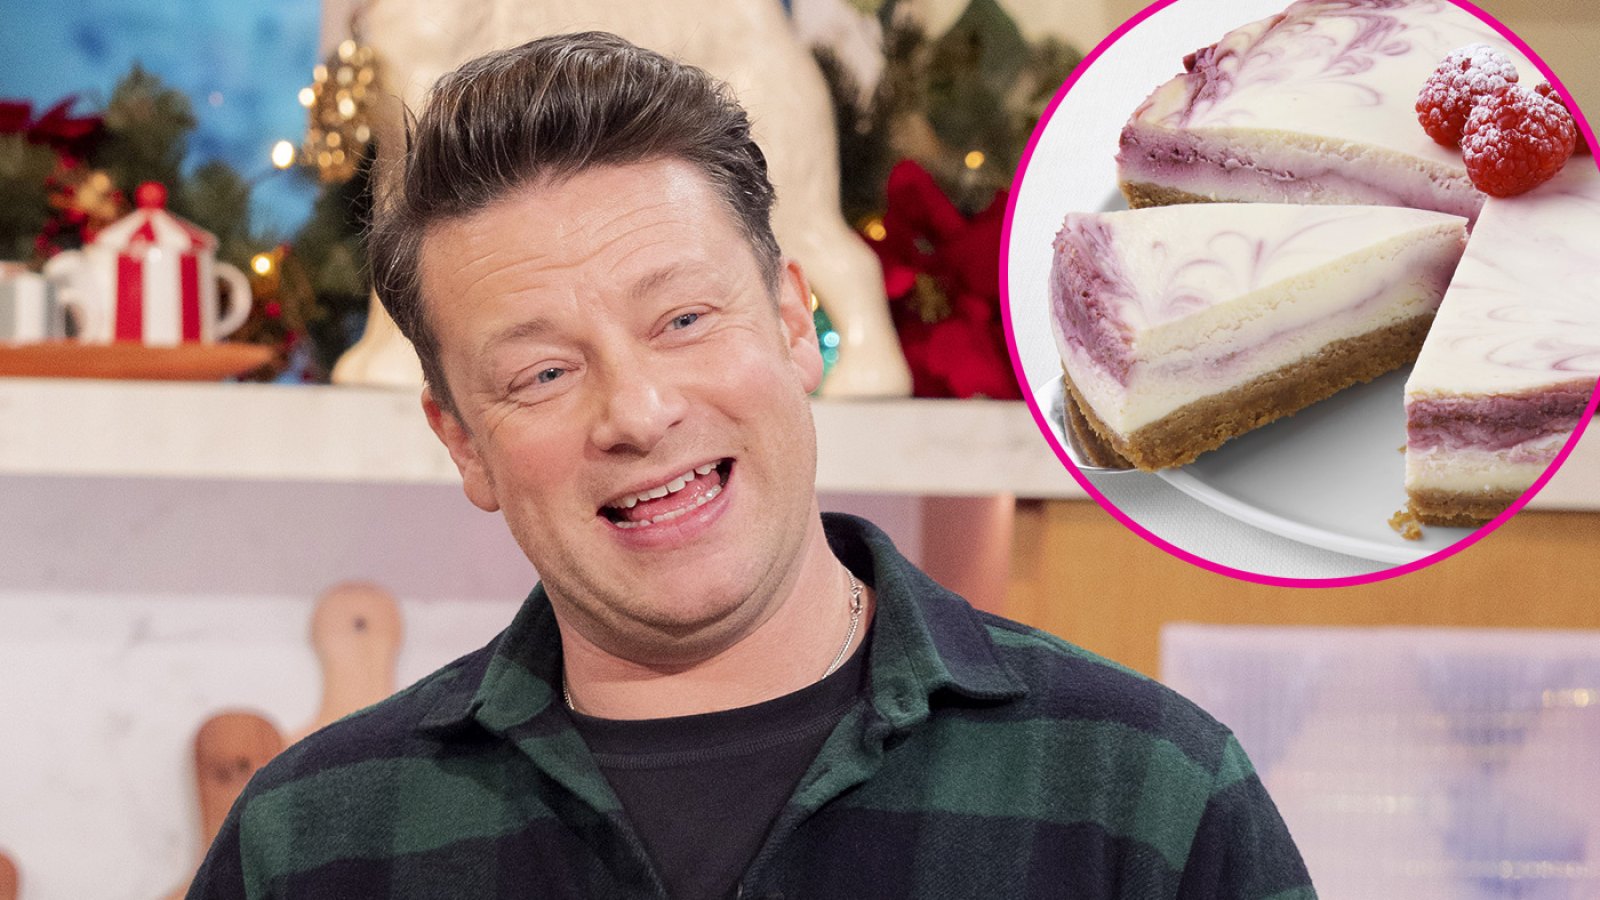 Culinary Star Jamie Oliver Shares His Baked Lemon Cheesecake Perfect for Easter- Recipe - 449